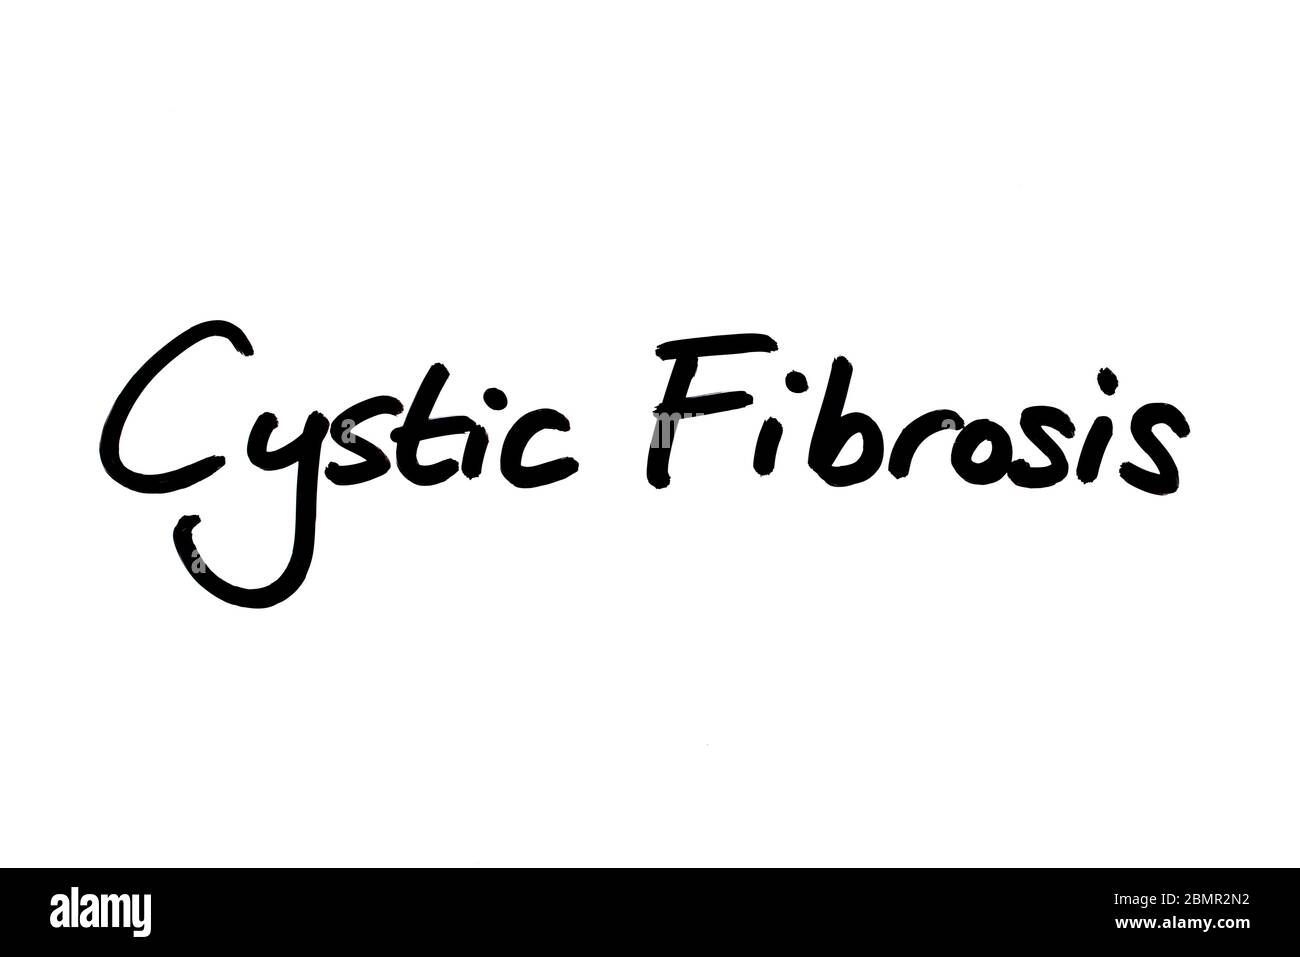 Cystic Fibrosis handwritten on a white background. Stock Photo